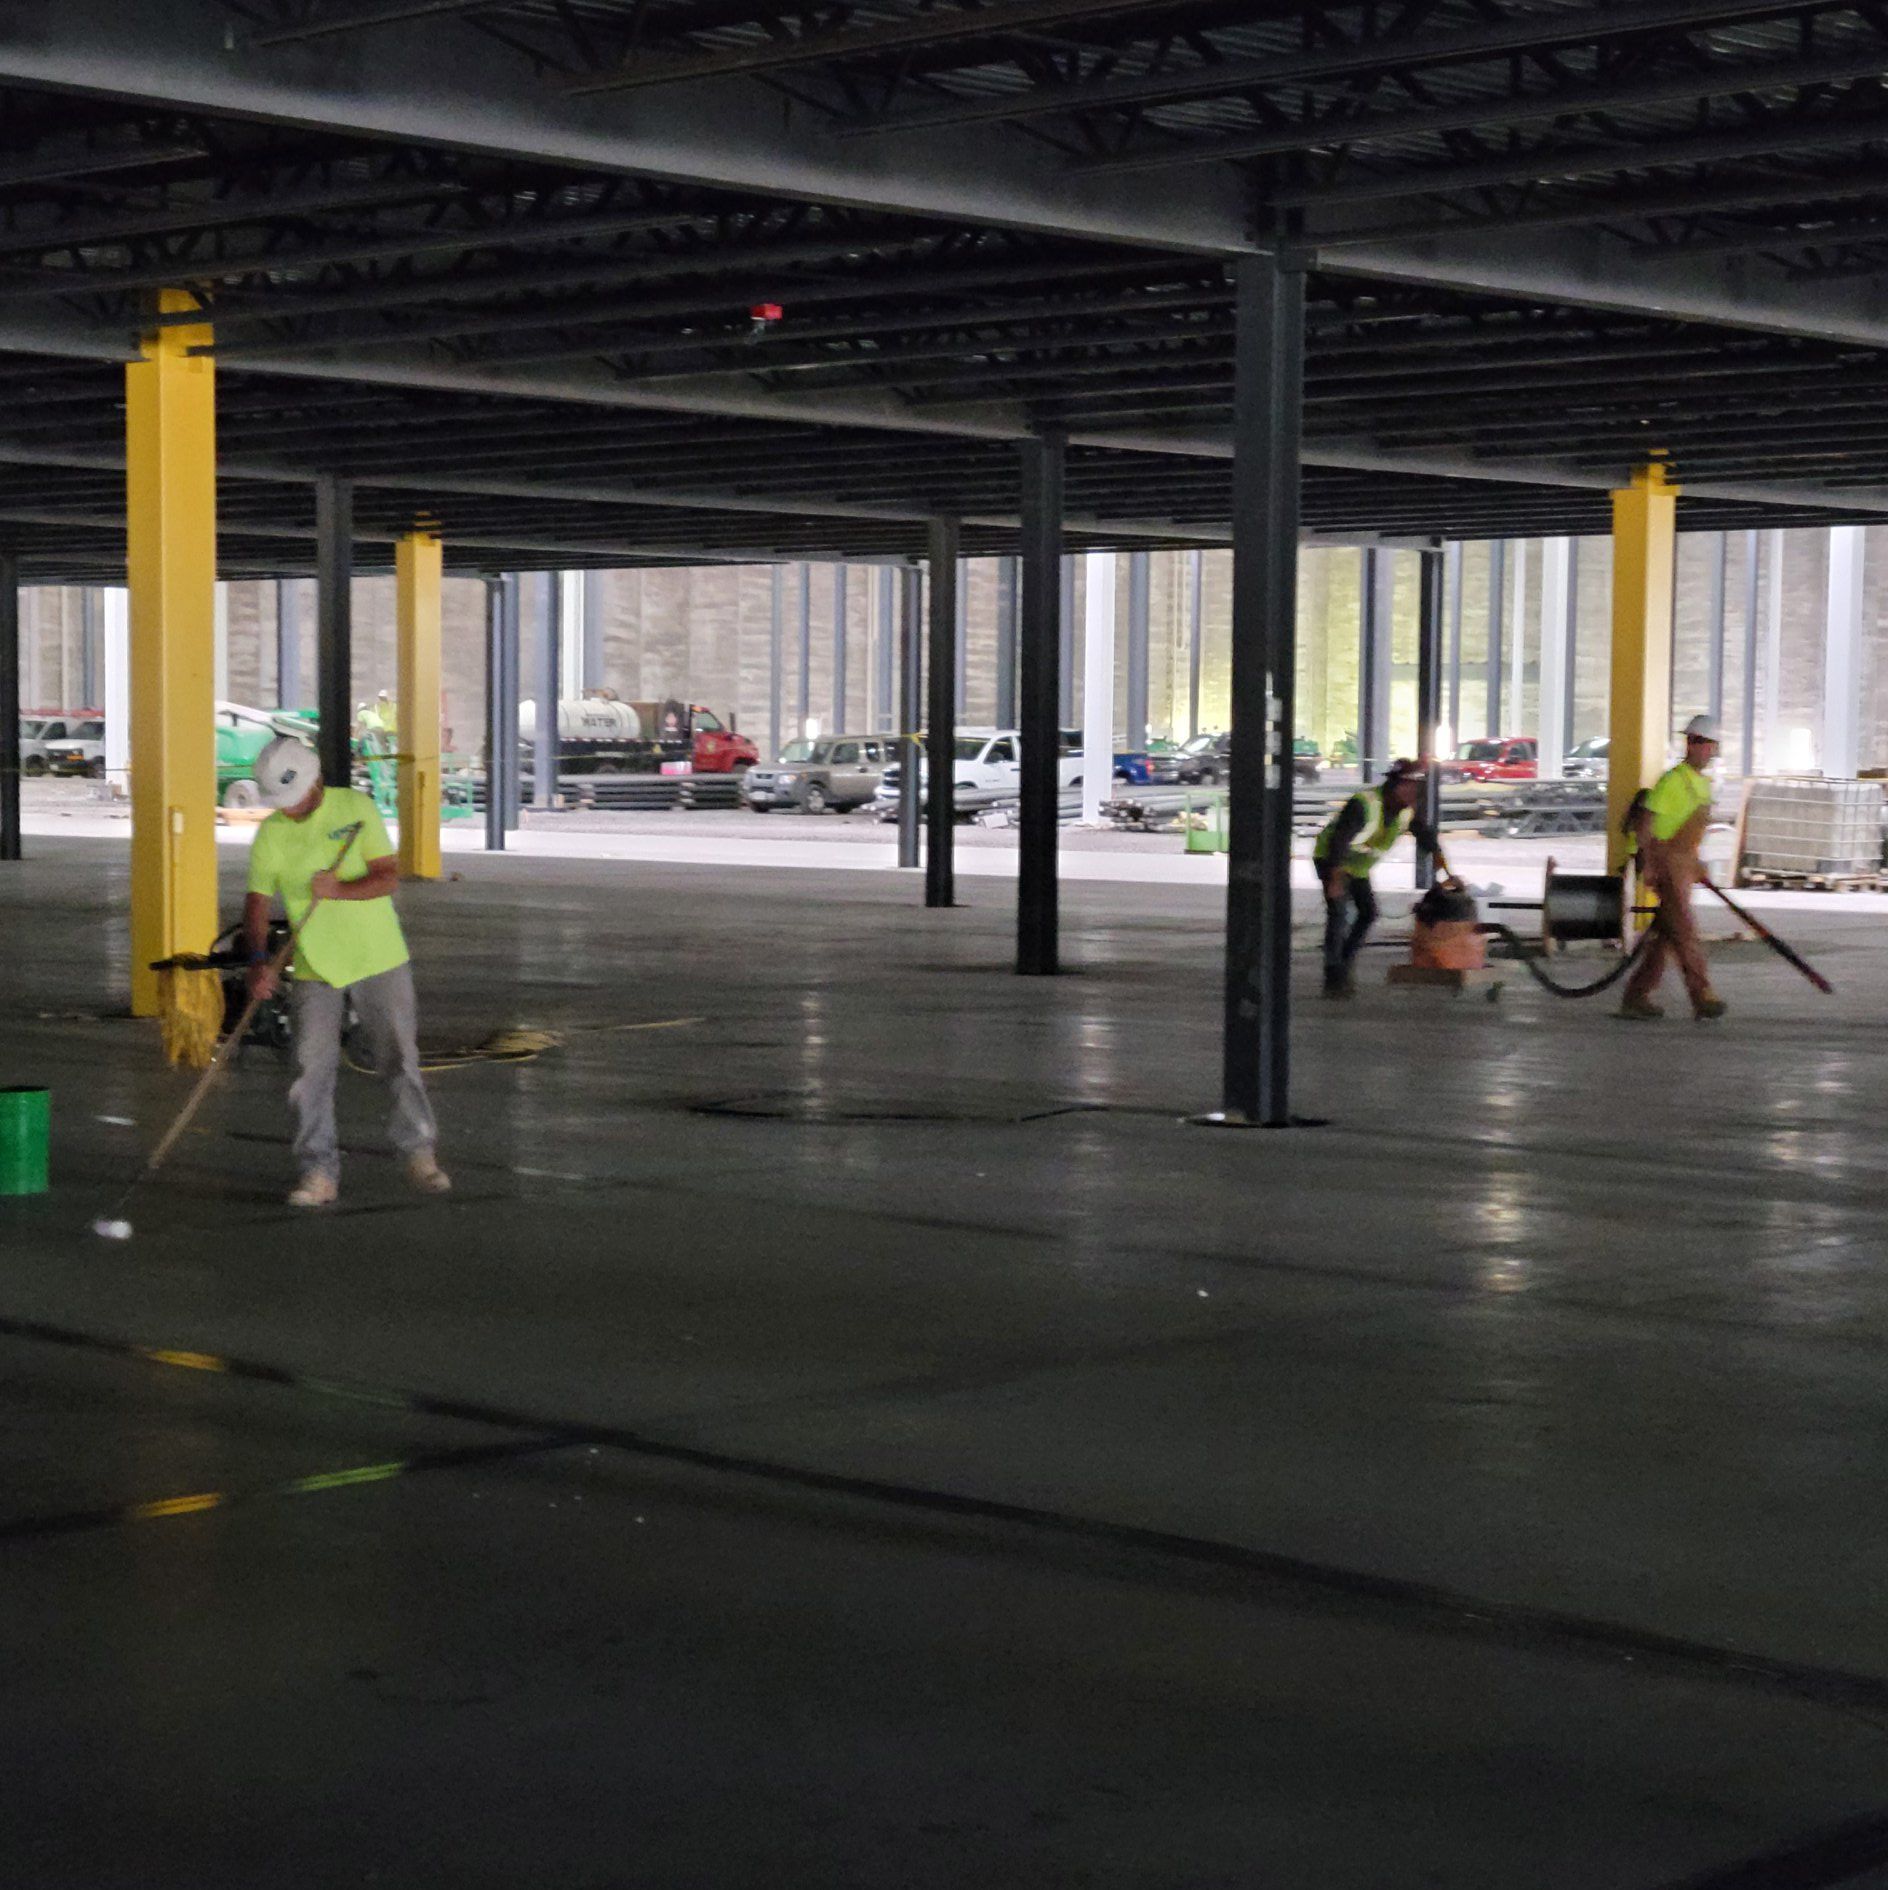 The finishing touches by Ameriseal on a concrete caulking job in a parking deck.  Ameriseal laid over 22 miles of joint sealants in this parking deck.